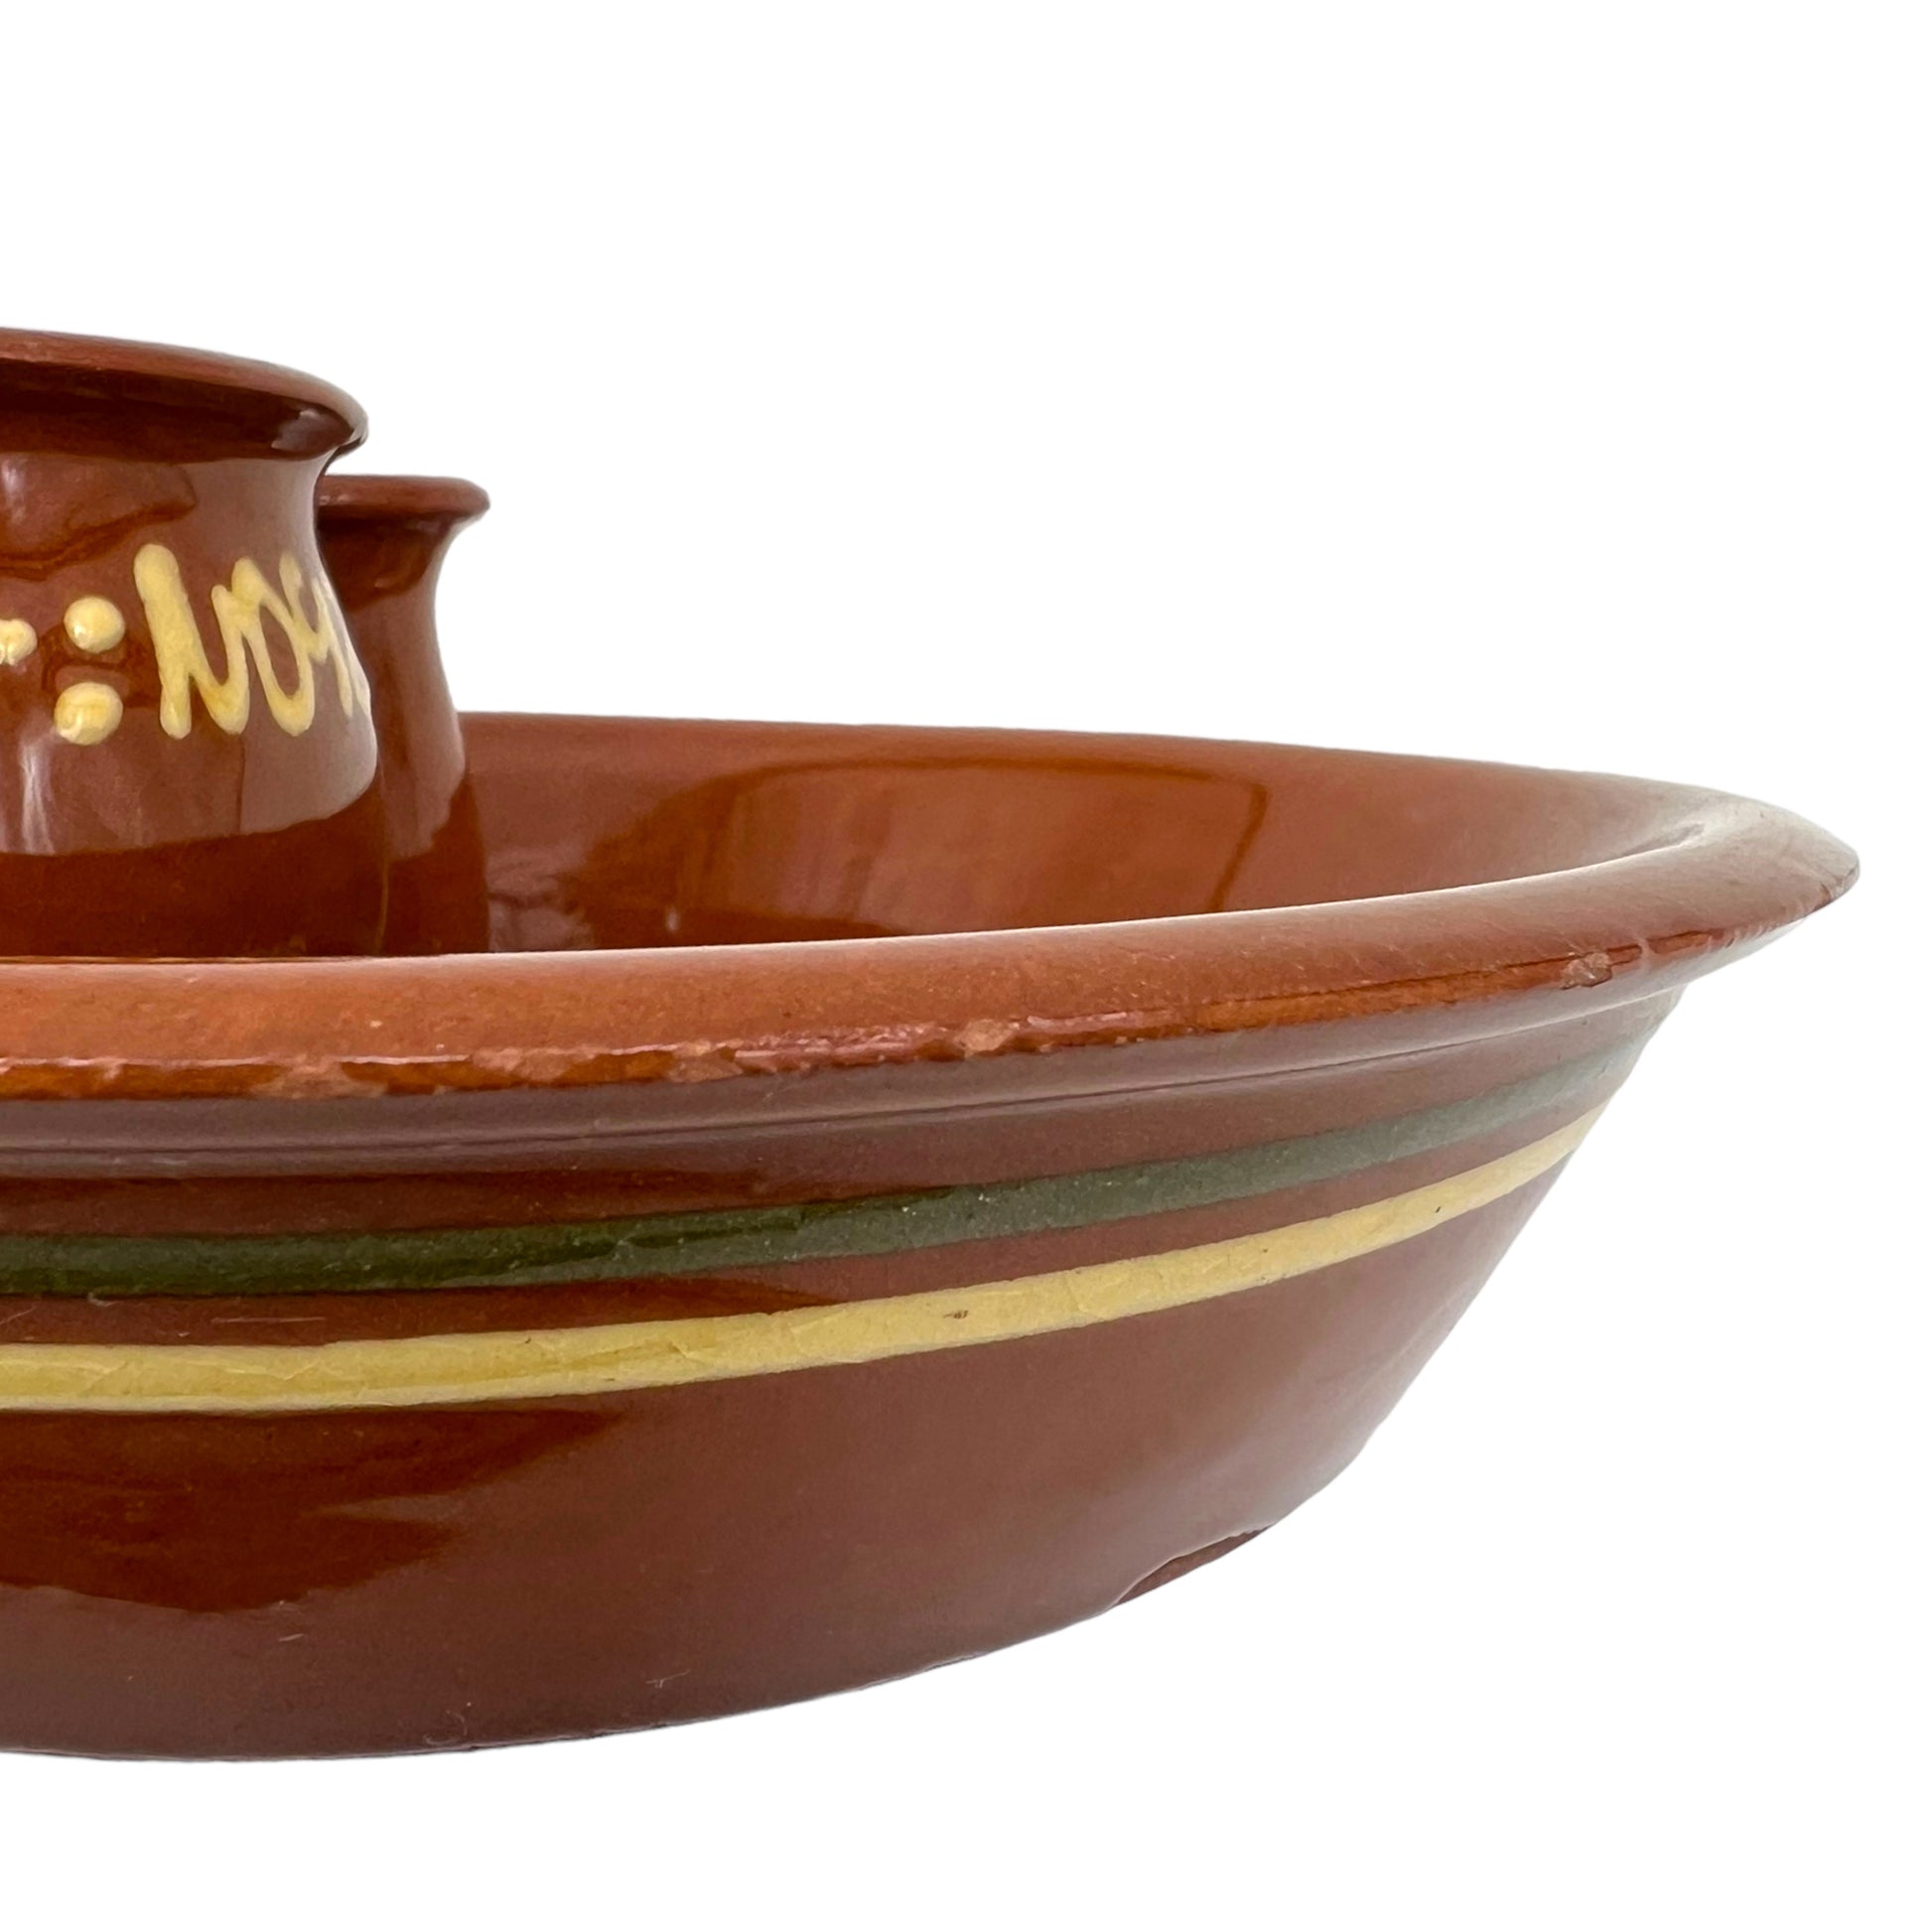 French traditional olive dish sold by All Things French Store